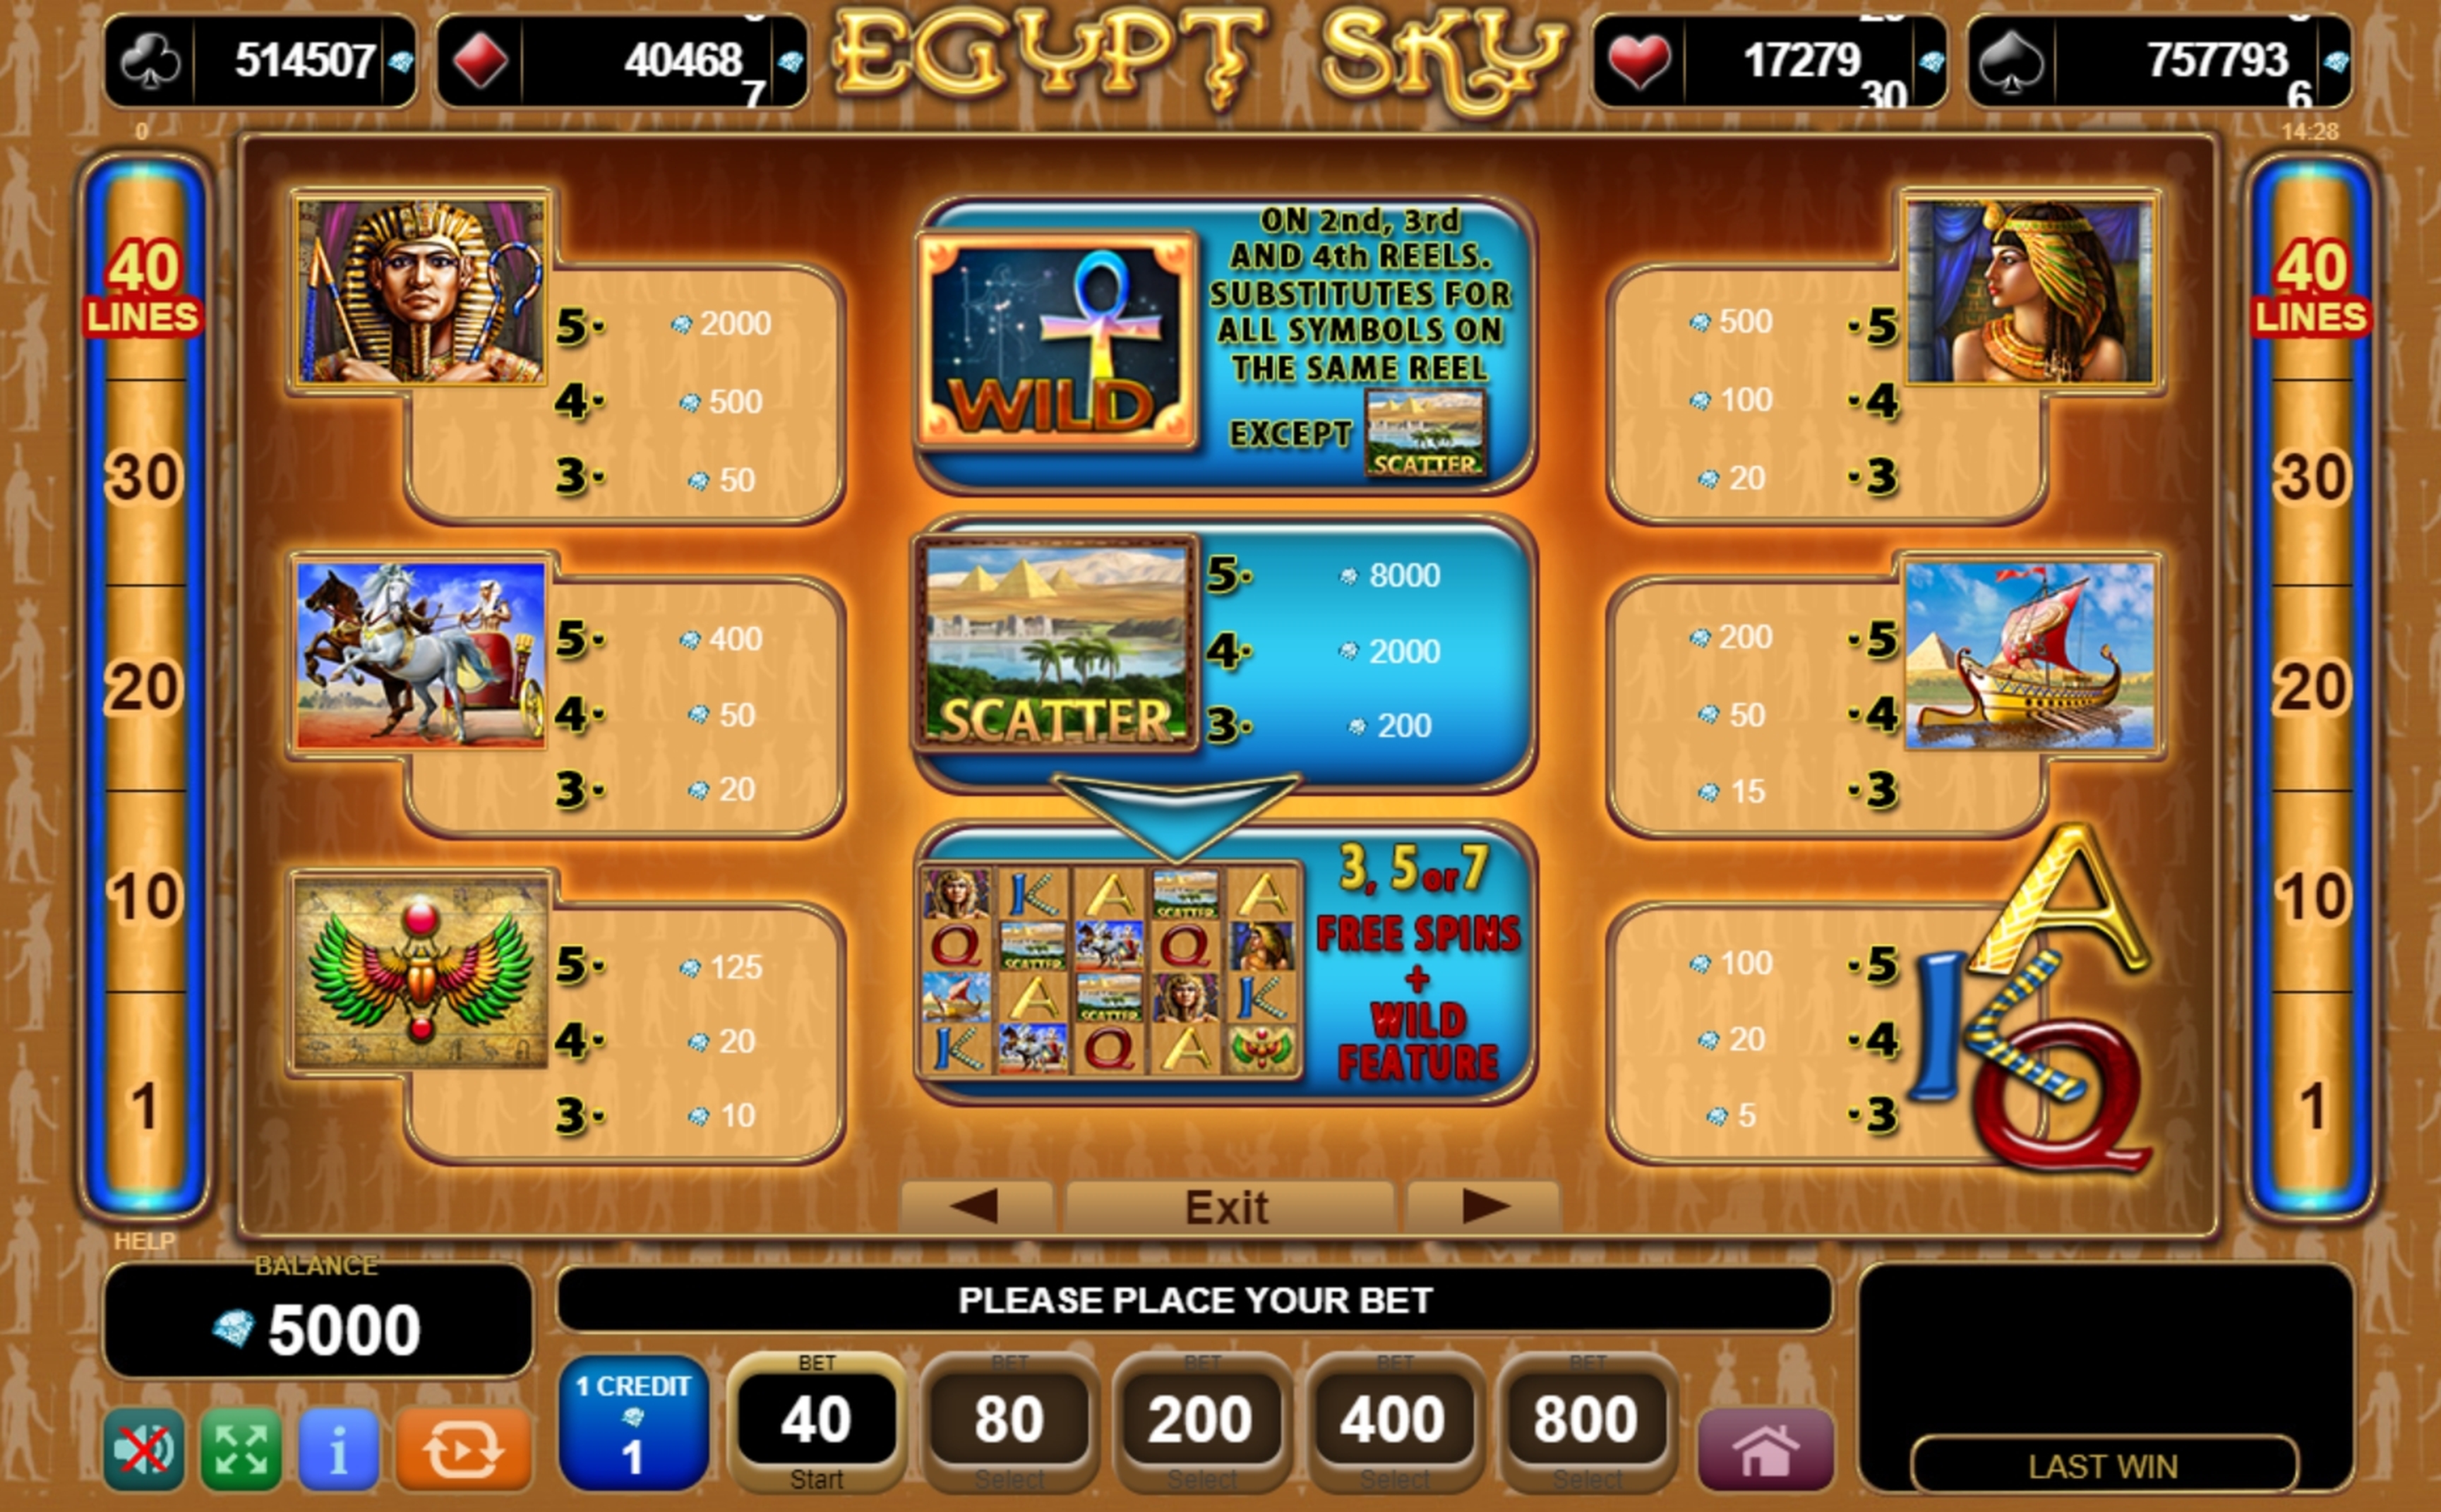 Info of Egypt Sky Slot Game by EGT